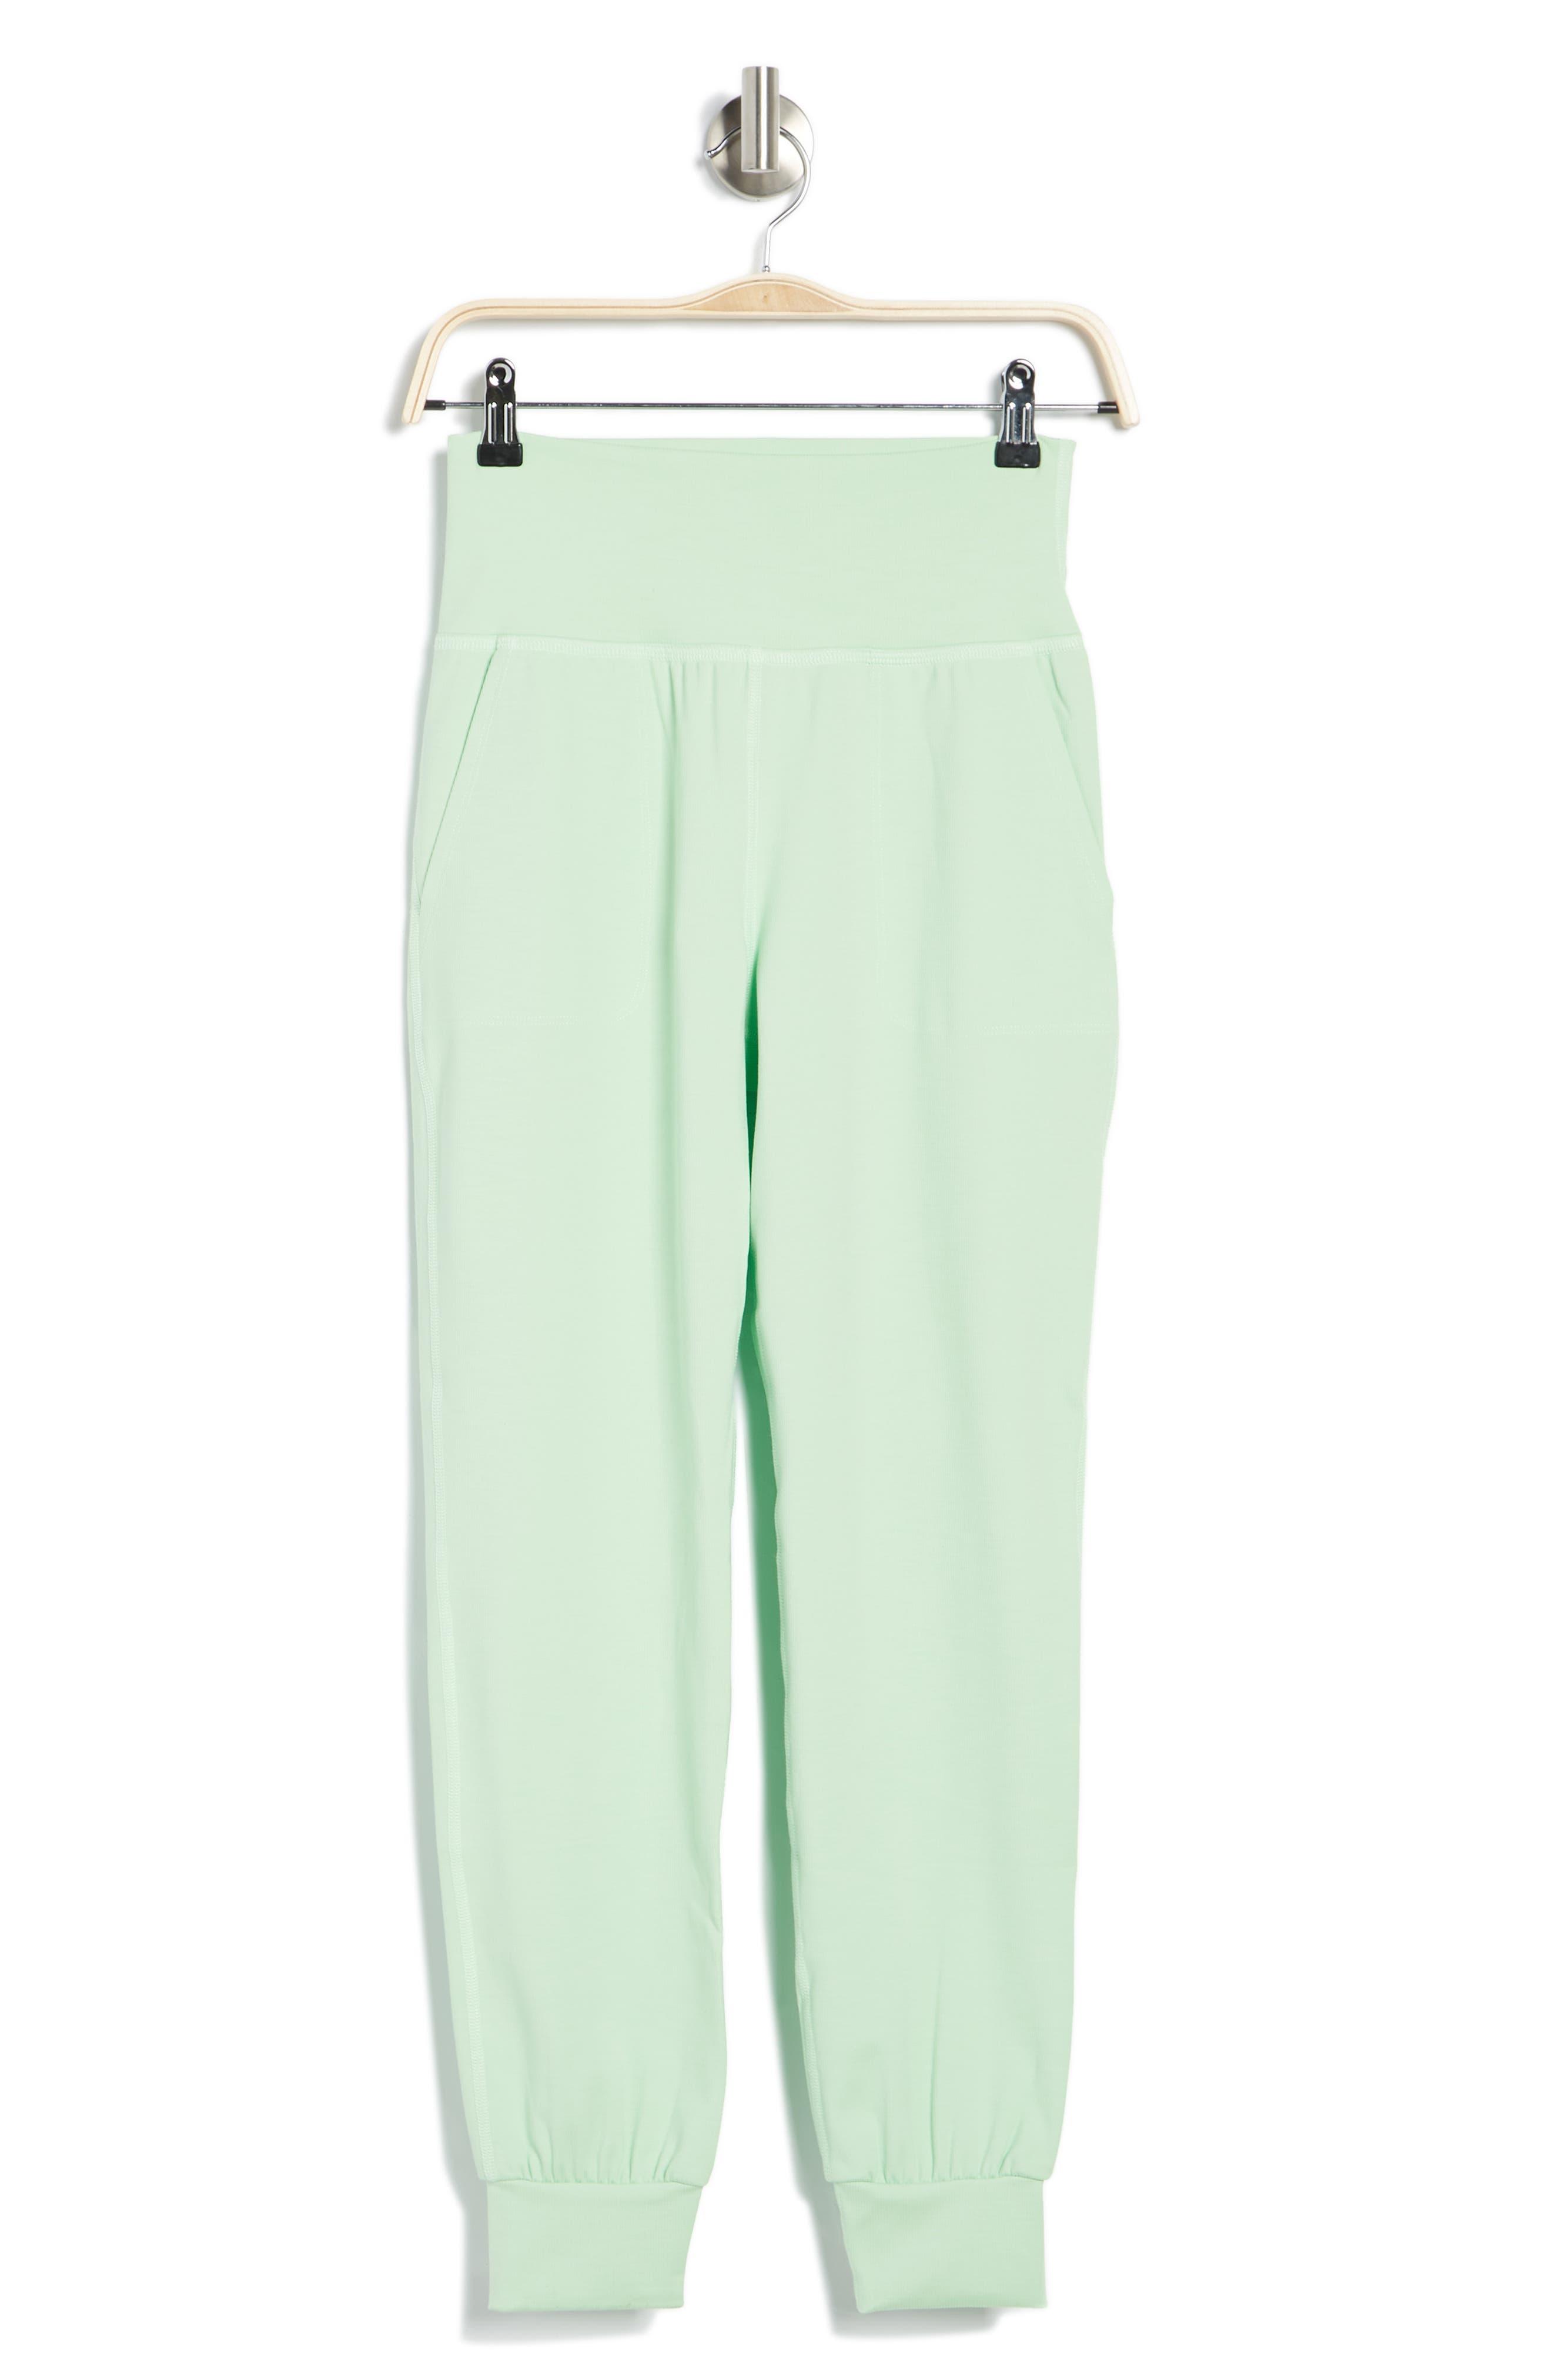 Beyond Yoga Heather Rib All Day Flare Pant at